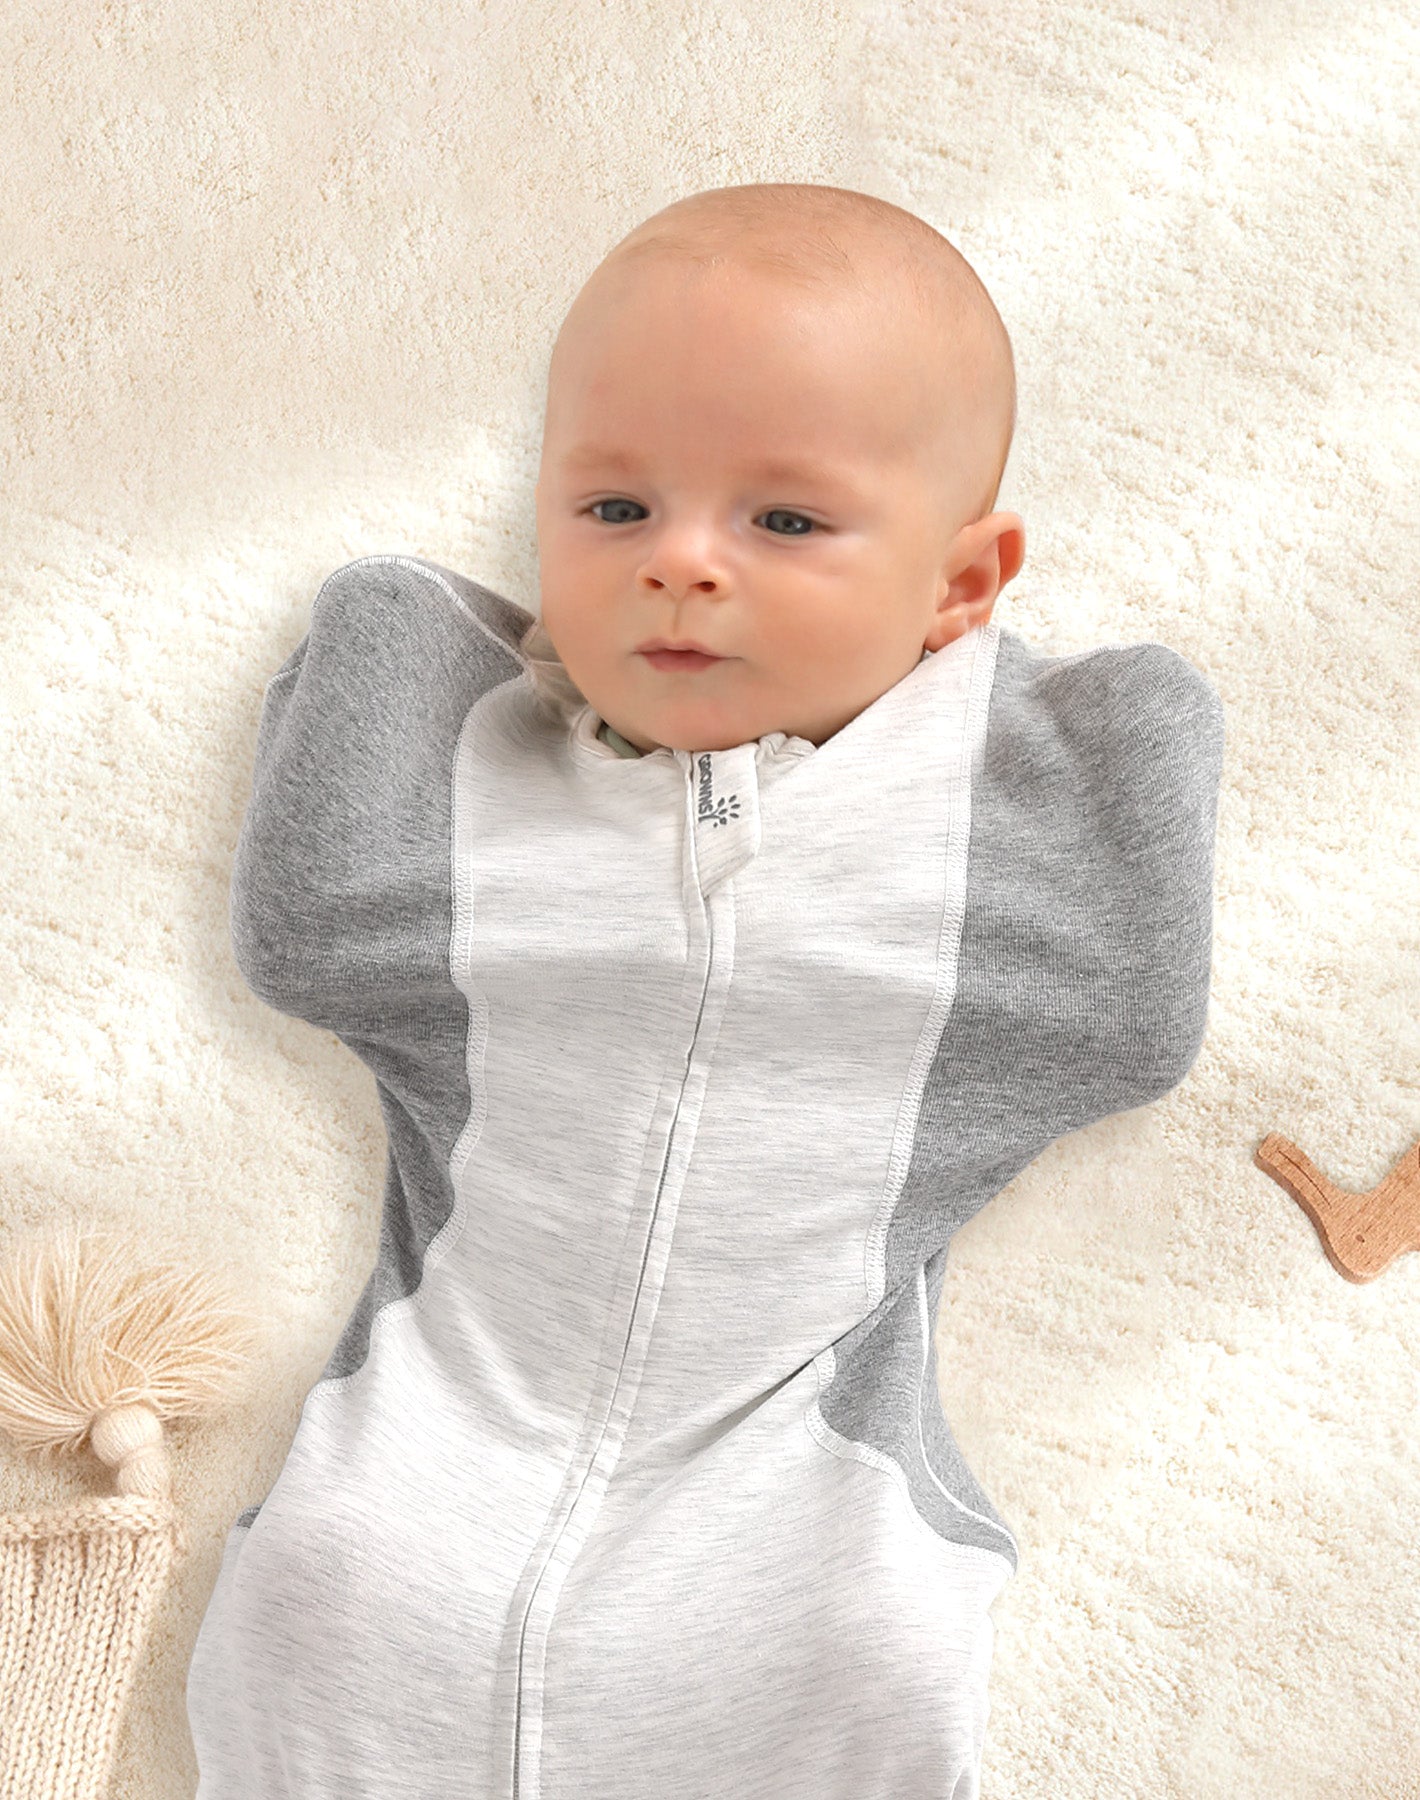 GROWNSY Baby Swaddle for Newborns